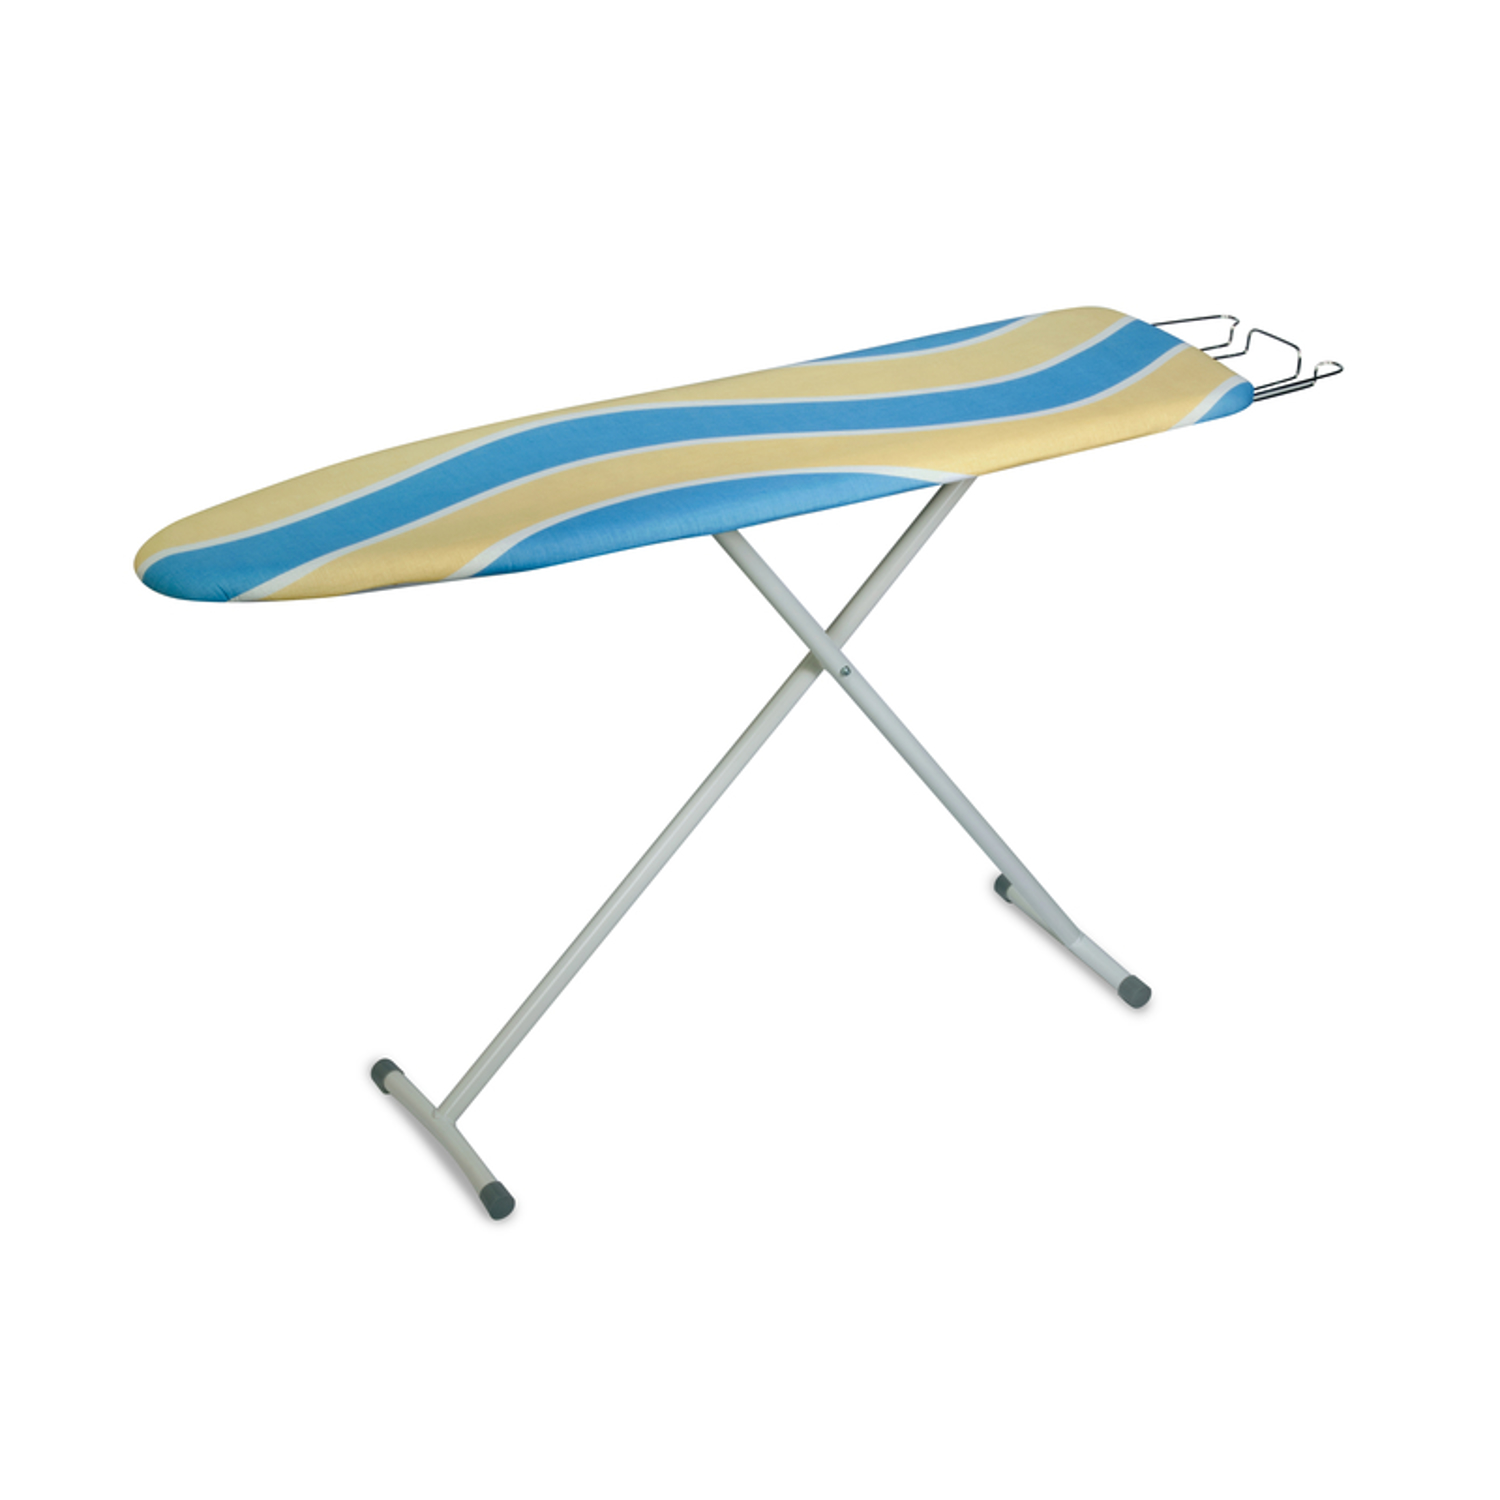 Photos - Ironing Accessory Honey-Can-Do 36 in. H X 54 in. W X 13 in. L Ironing Board with Iron Rest P